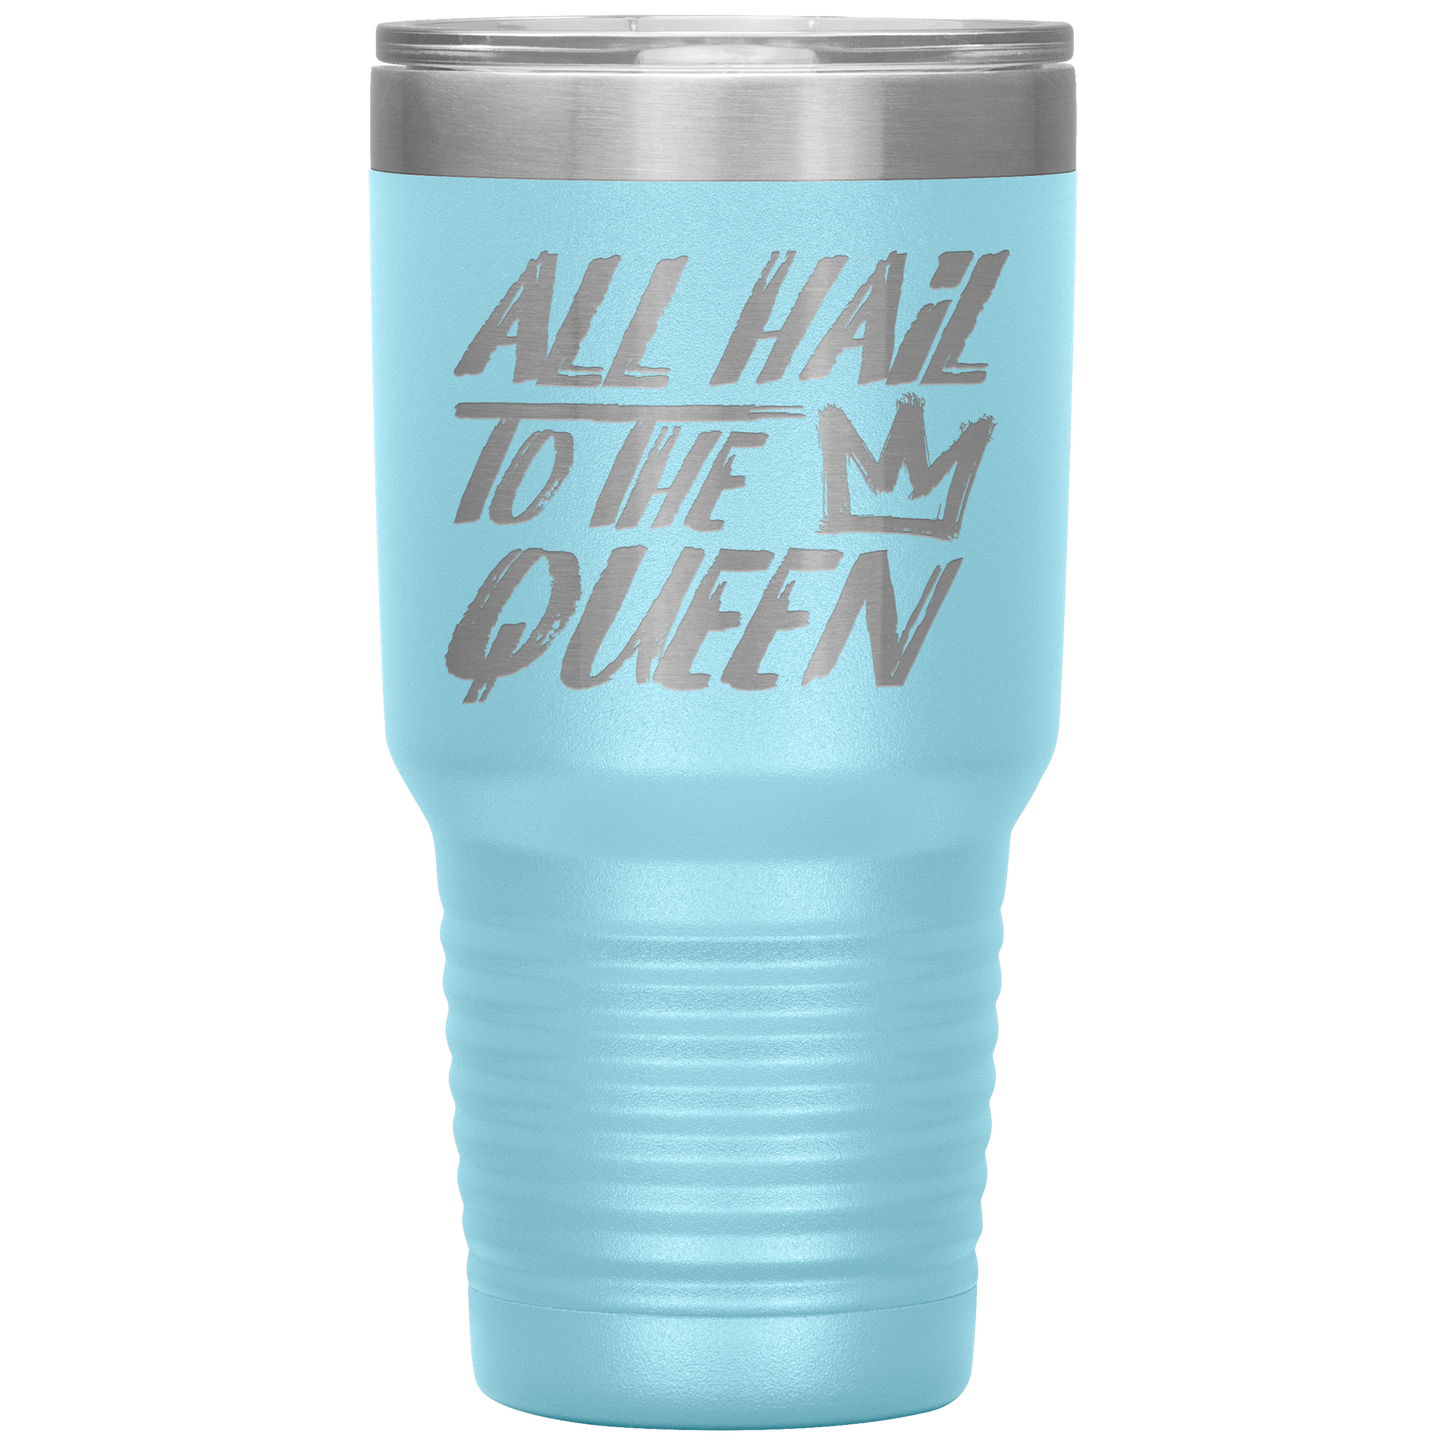 ALL HAIL TO THE QUEEN TUMBLER